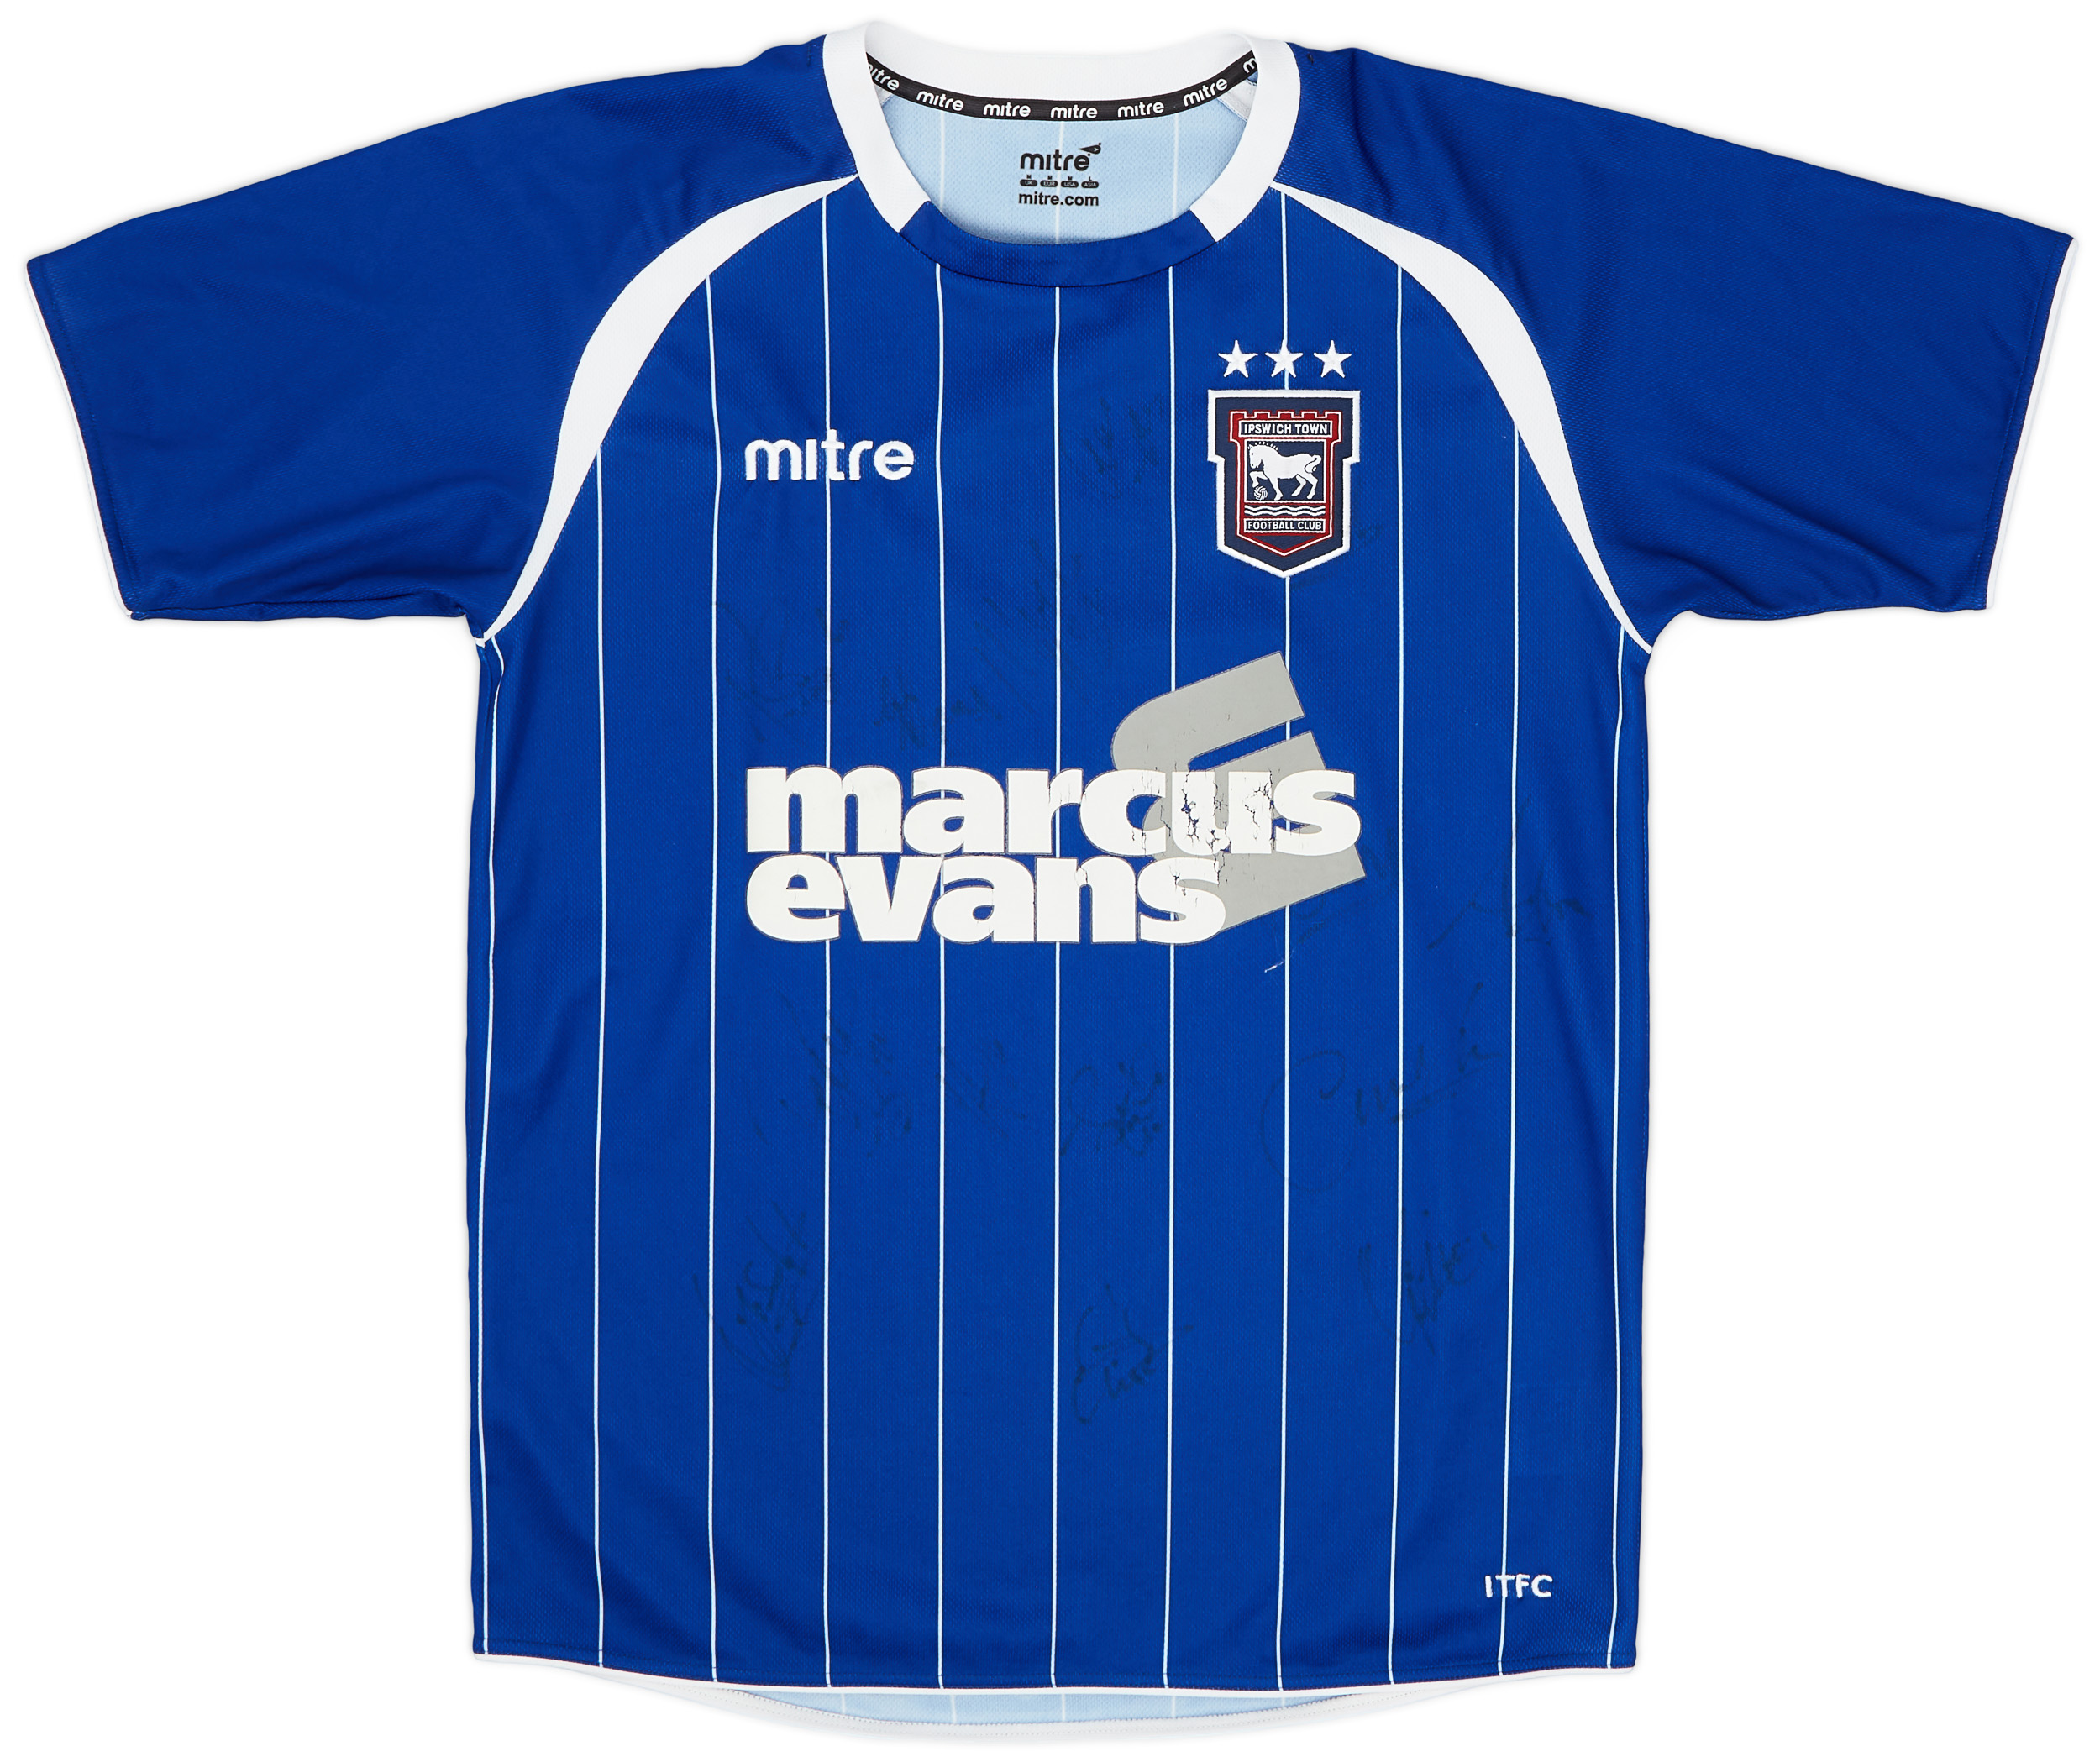 2011-12 Ipswich Town Signed Home Shirt - 5/10 - ()